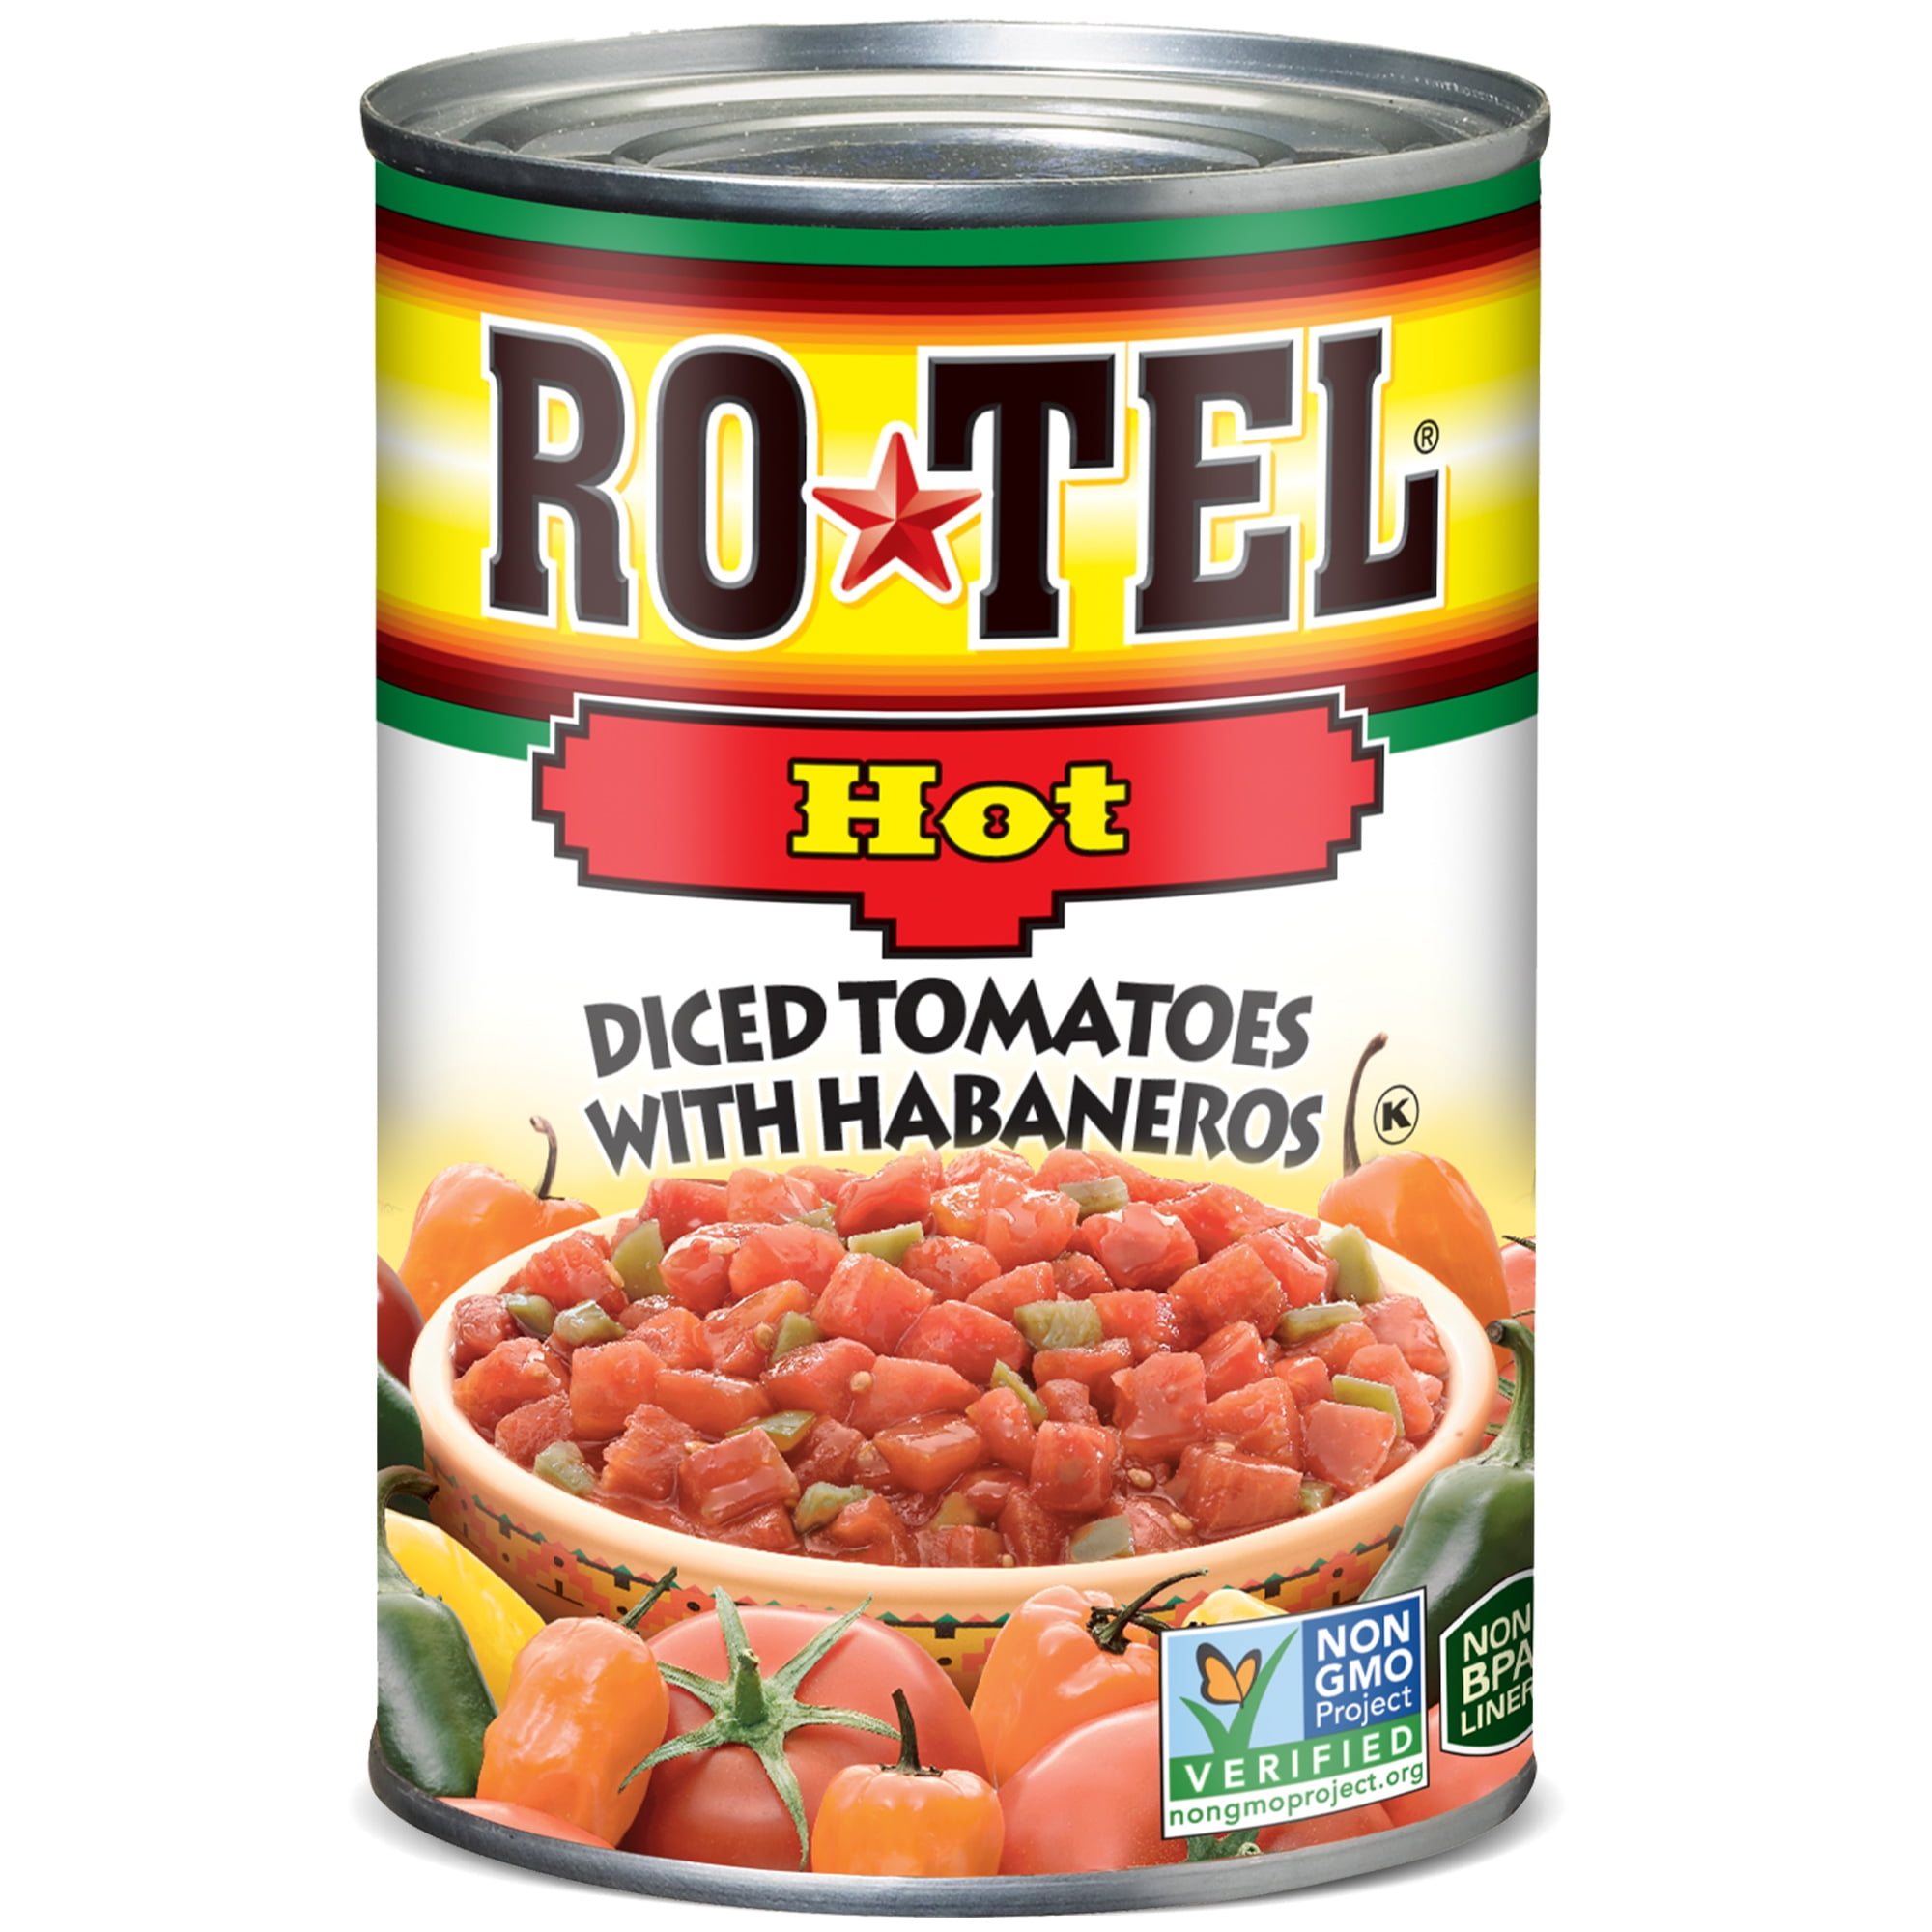 Rotel Hot Diced Tomatoes with Habaneros, 10 oz.